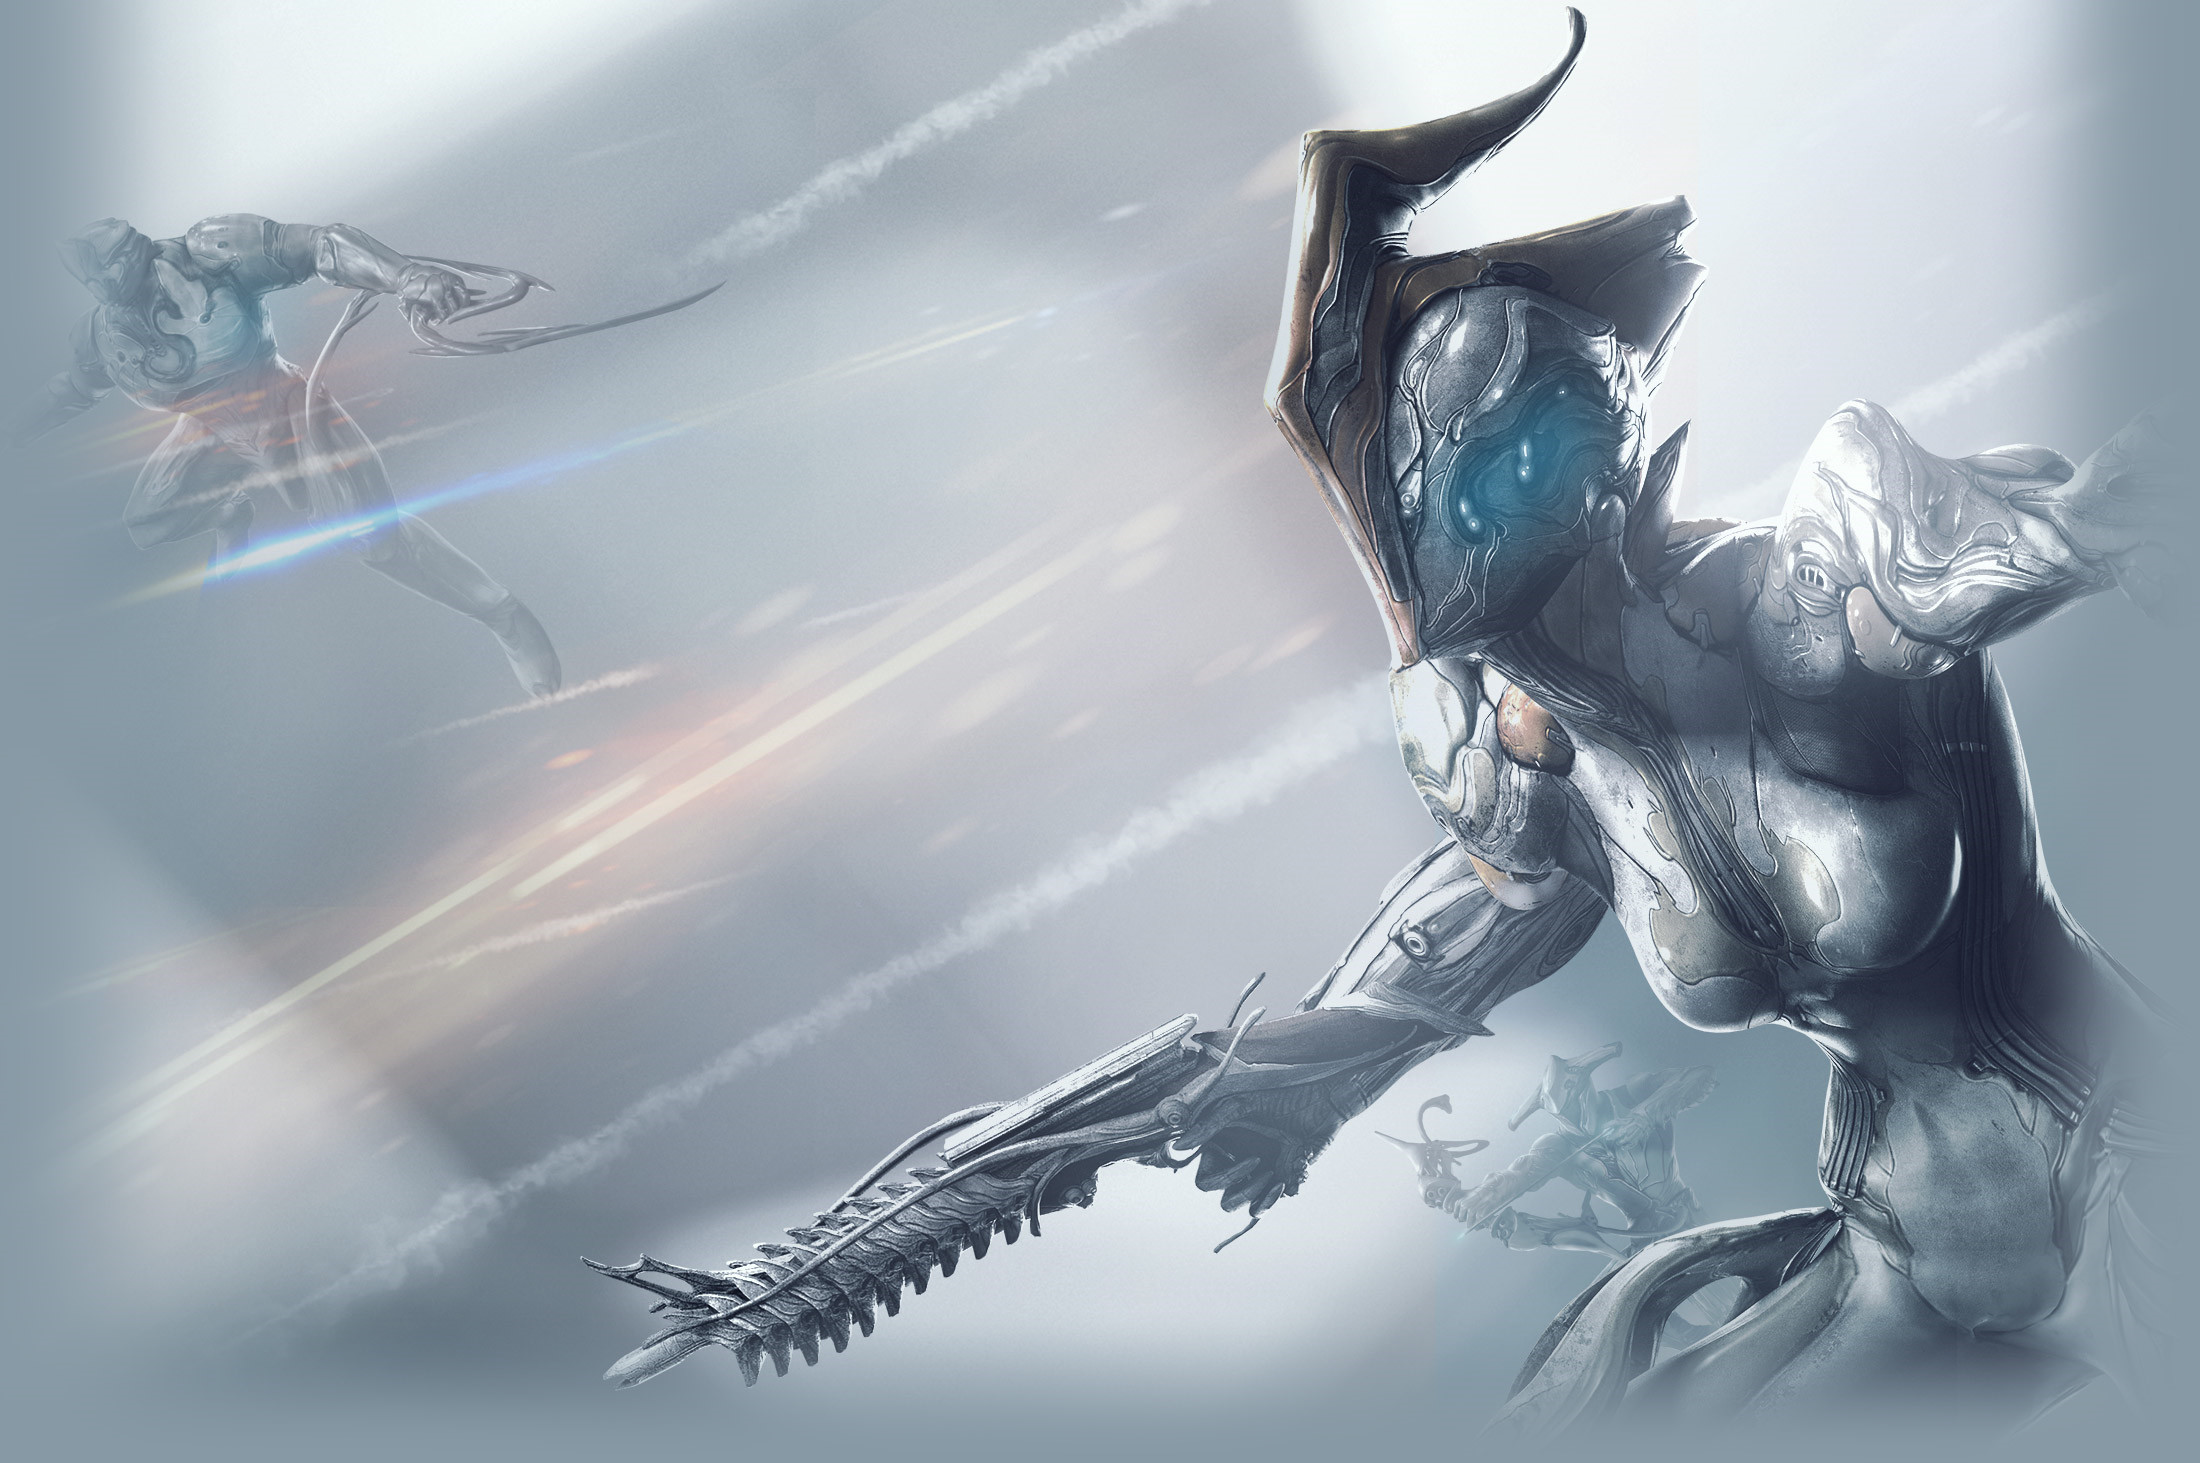 2200x1463 Find this Pin and more on Warframe Wallpapers by aymyao.